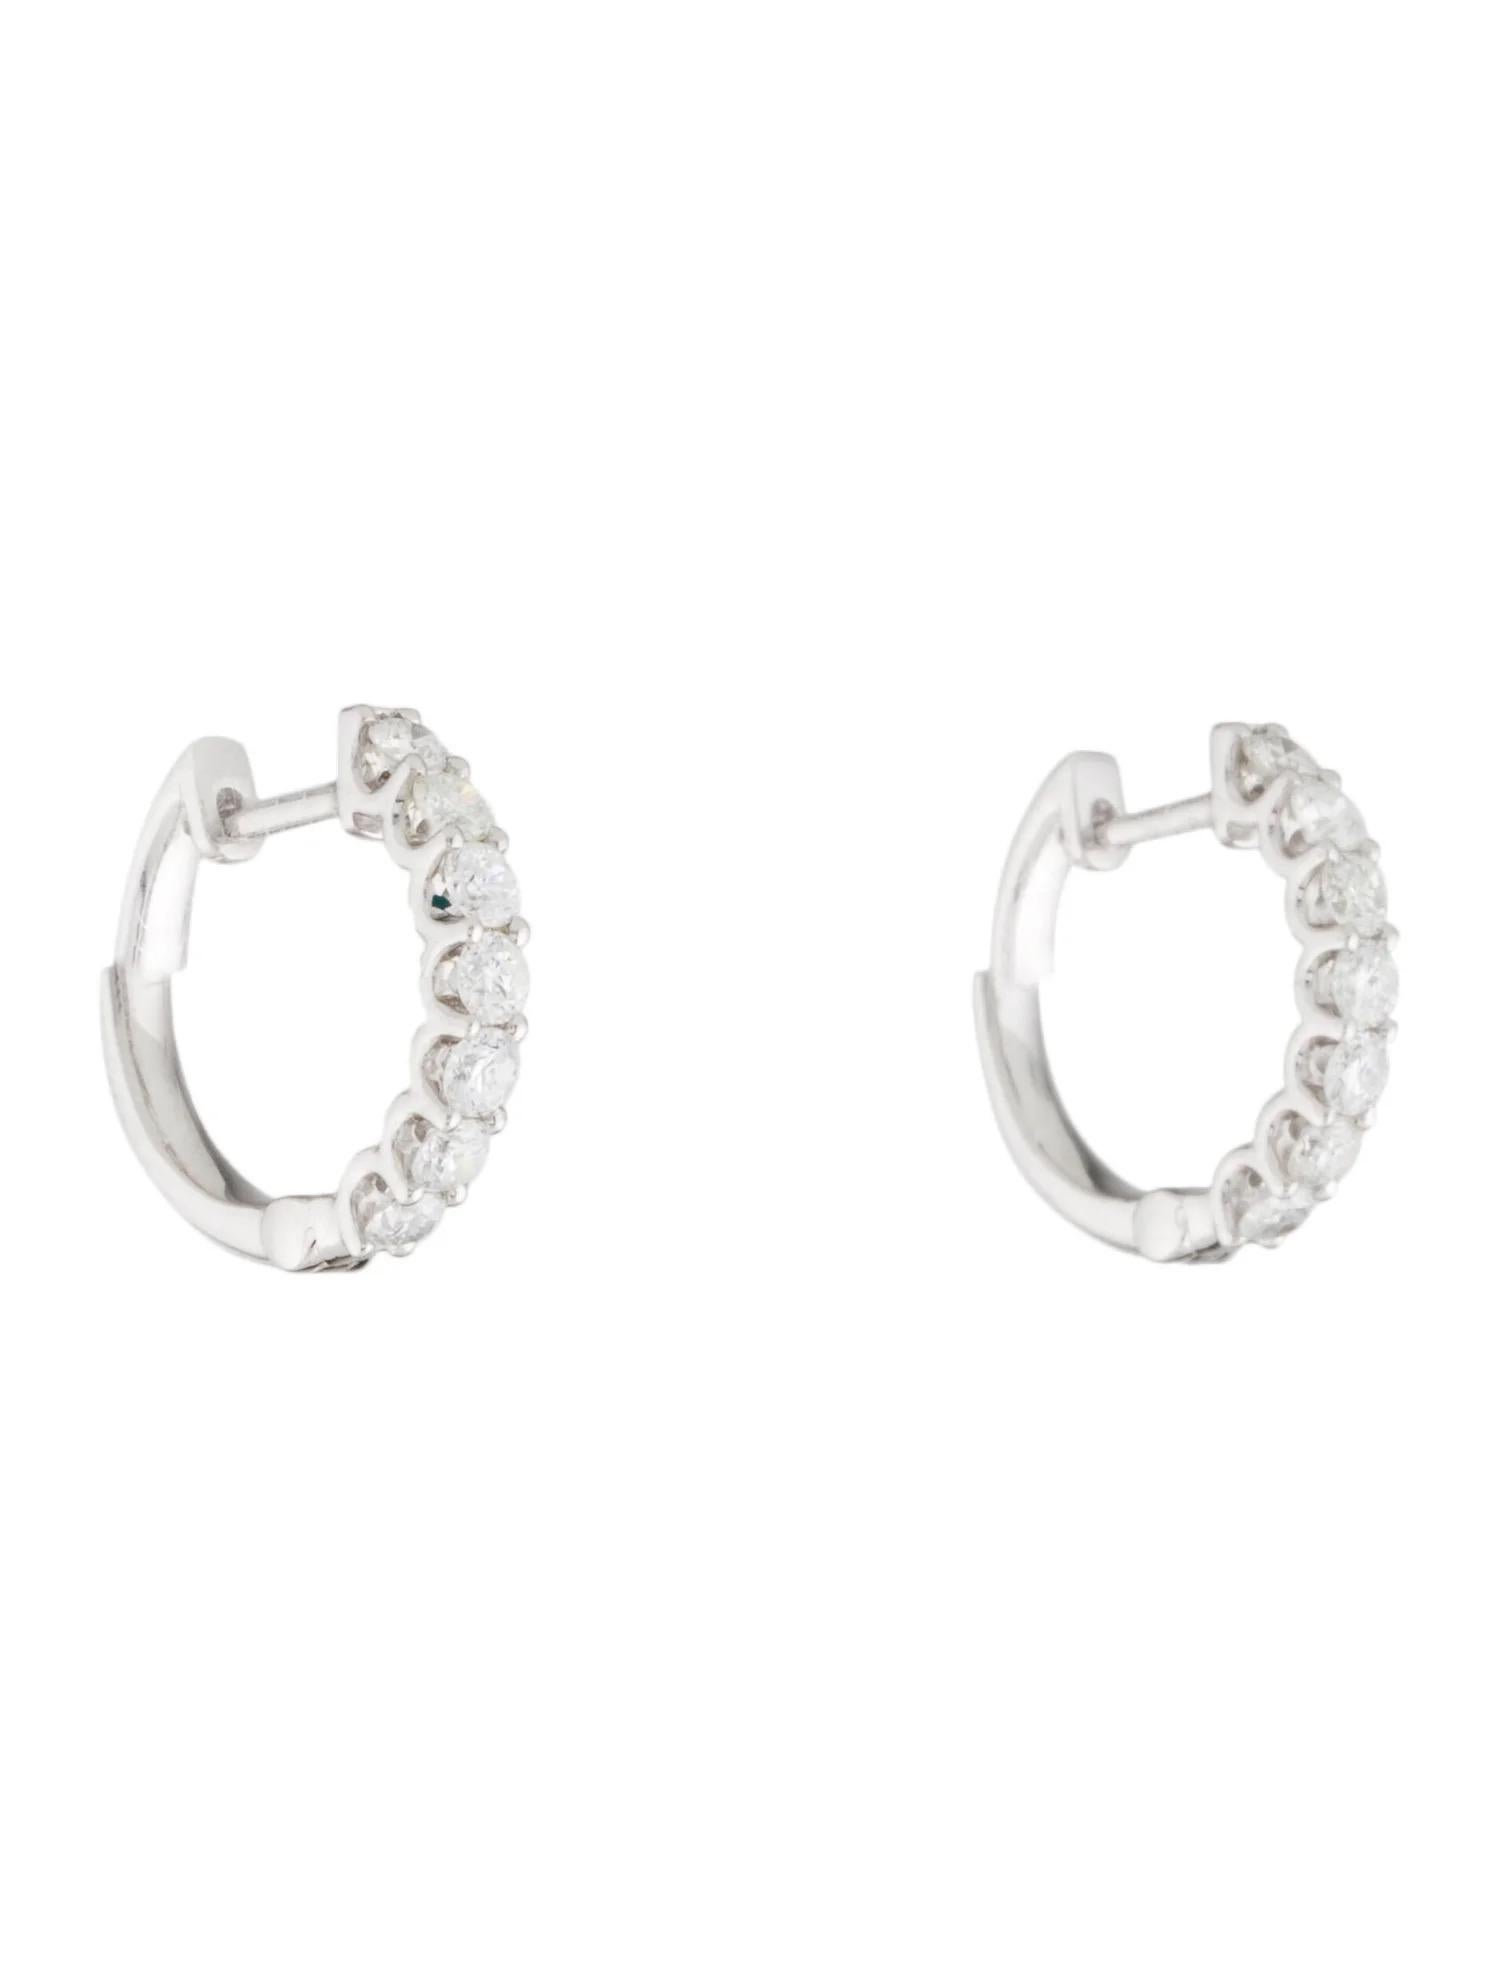 Give any outfit a glamorous flair with this pair of brilliant small thin hoop earrings from the Joelle Collection Encrusted with 0.80ct of exquisite round-cut white diamonds, these earrings add a playful sparkle to any look. The high polish 14k gold